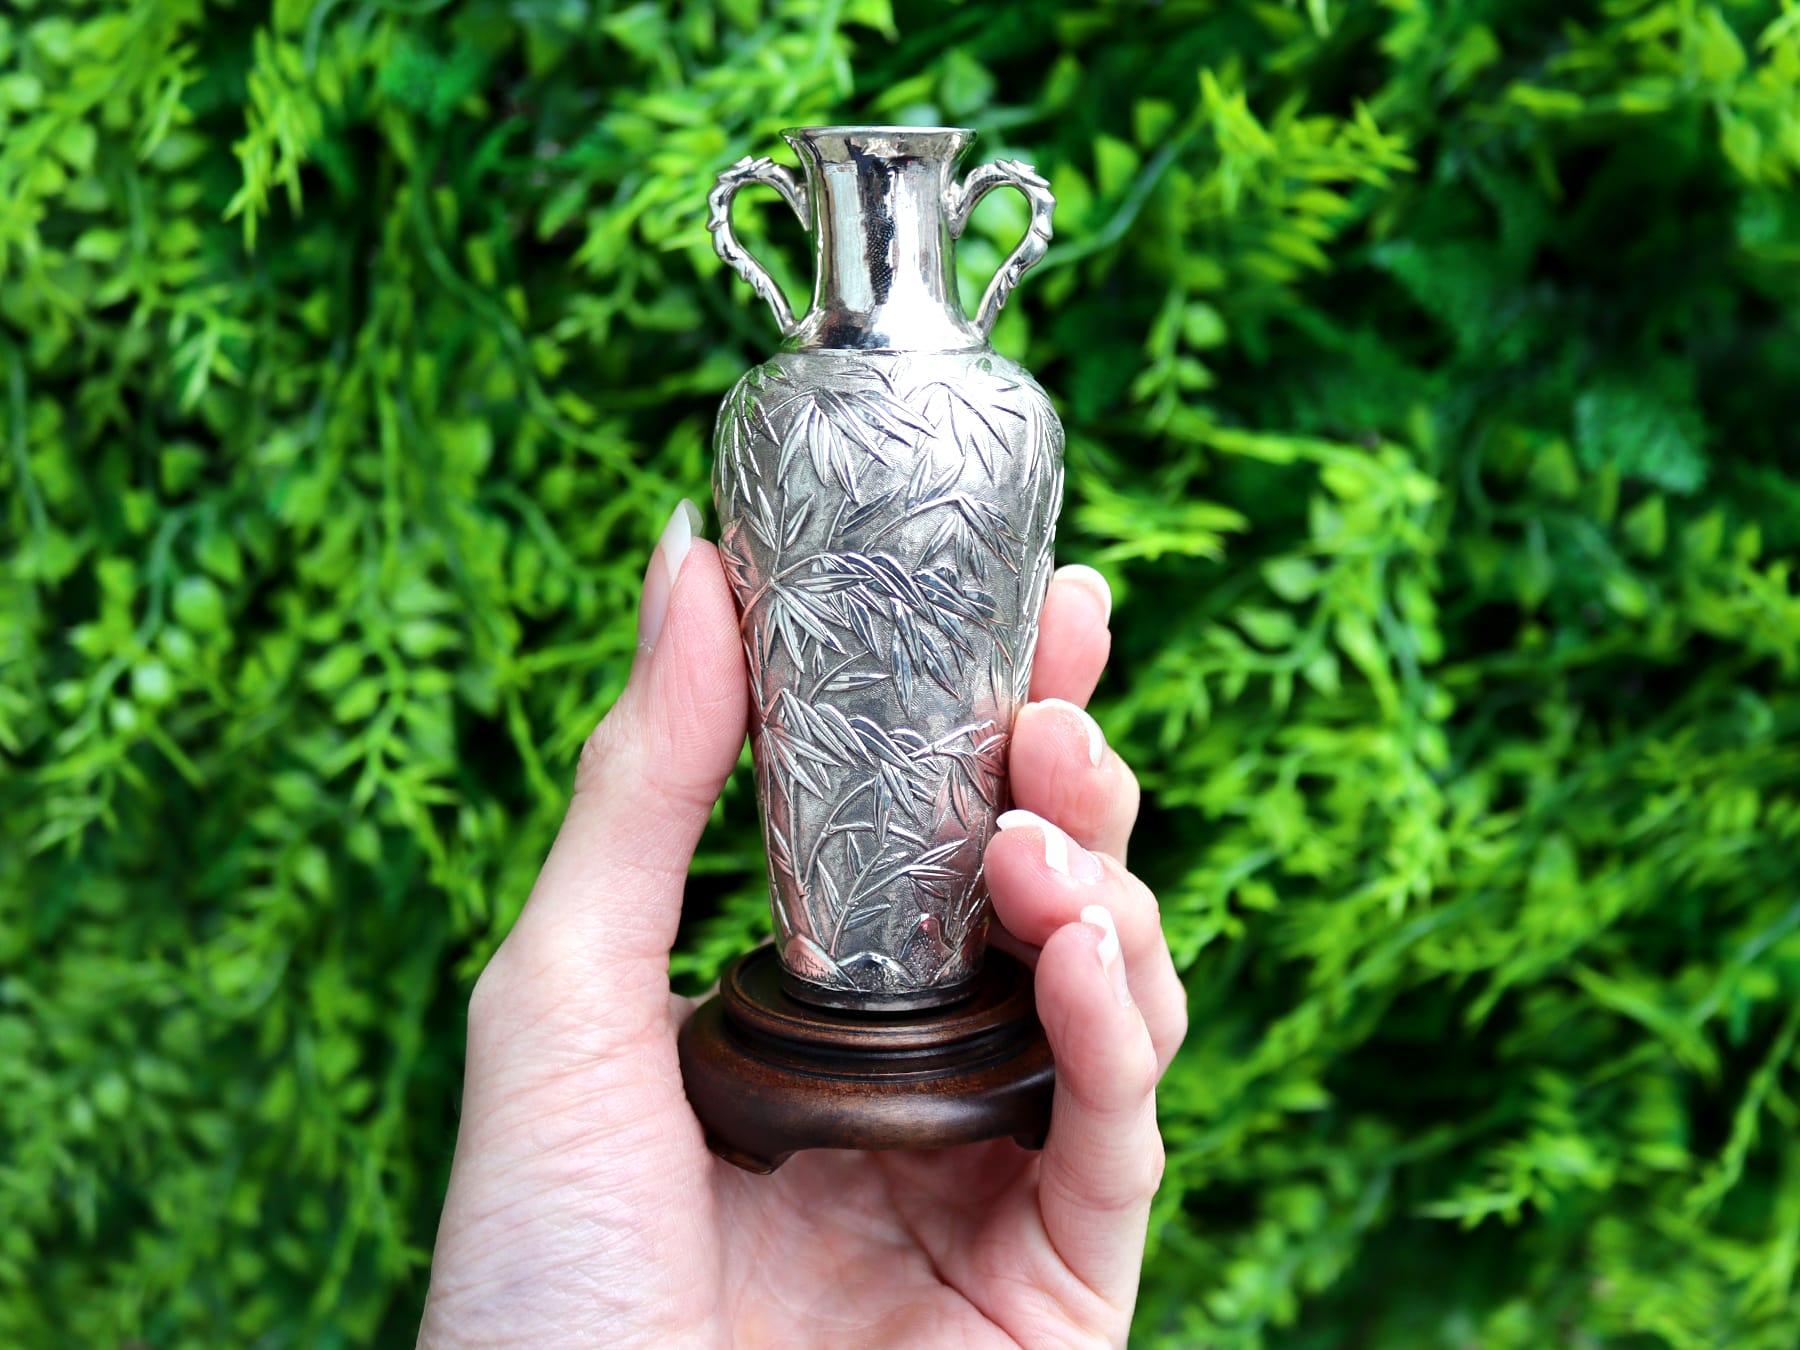 An exceptional, fine and impressive pair of antique Chinese export silver and cherry wood based vases; an addition to our ornamental silverware collection

These impressive antique Chinese export silver vases have a tapering cylindrical rounded form